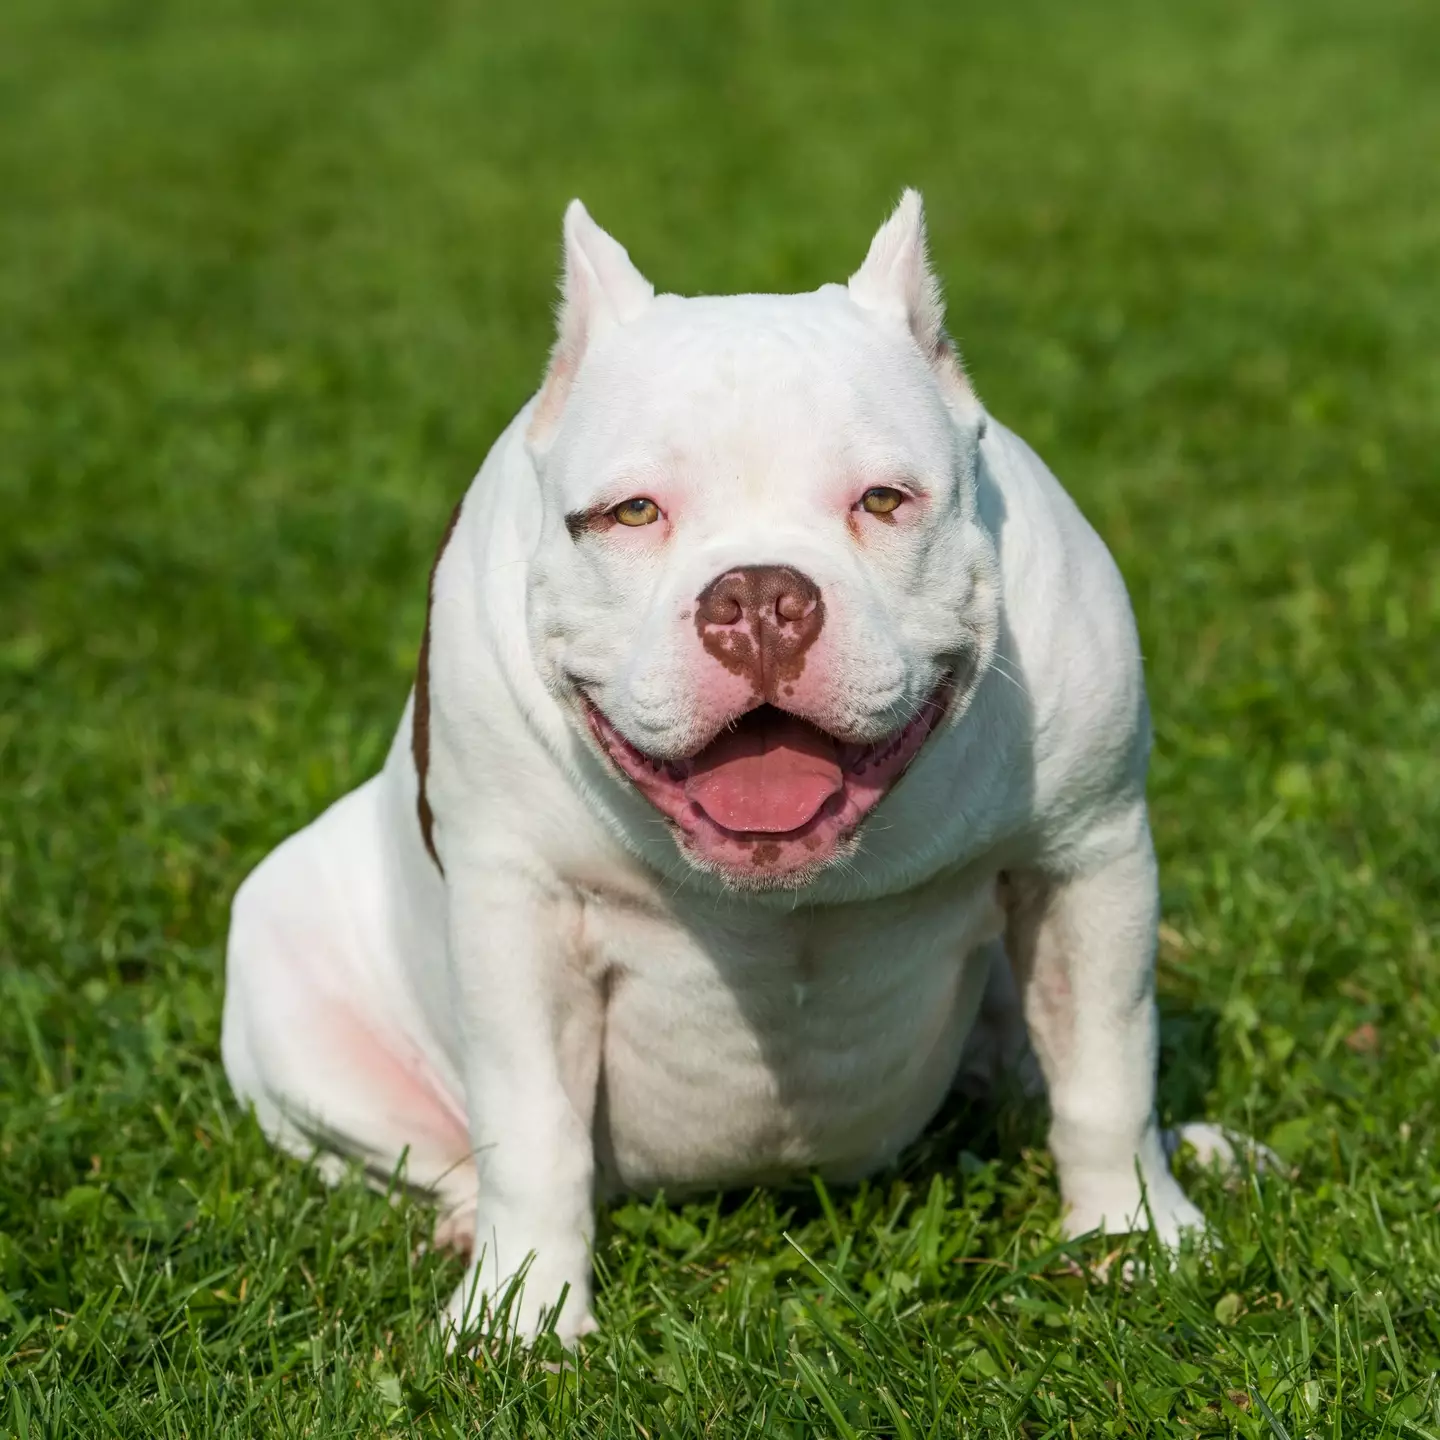 American Bully XLs may now be banned in the UK.